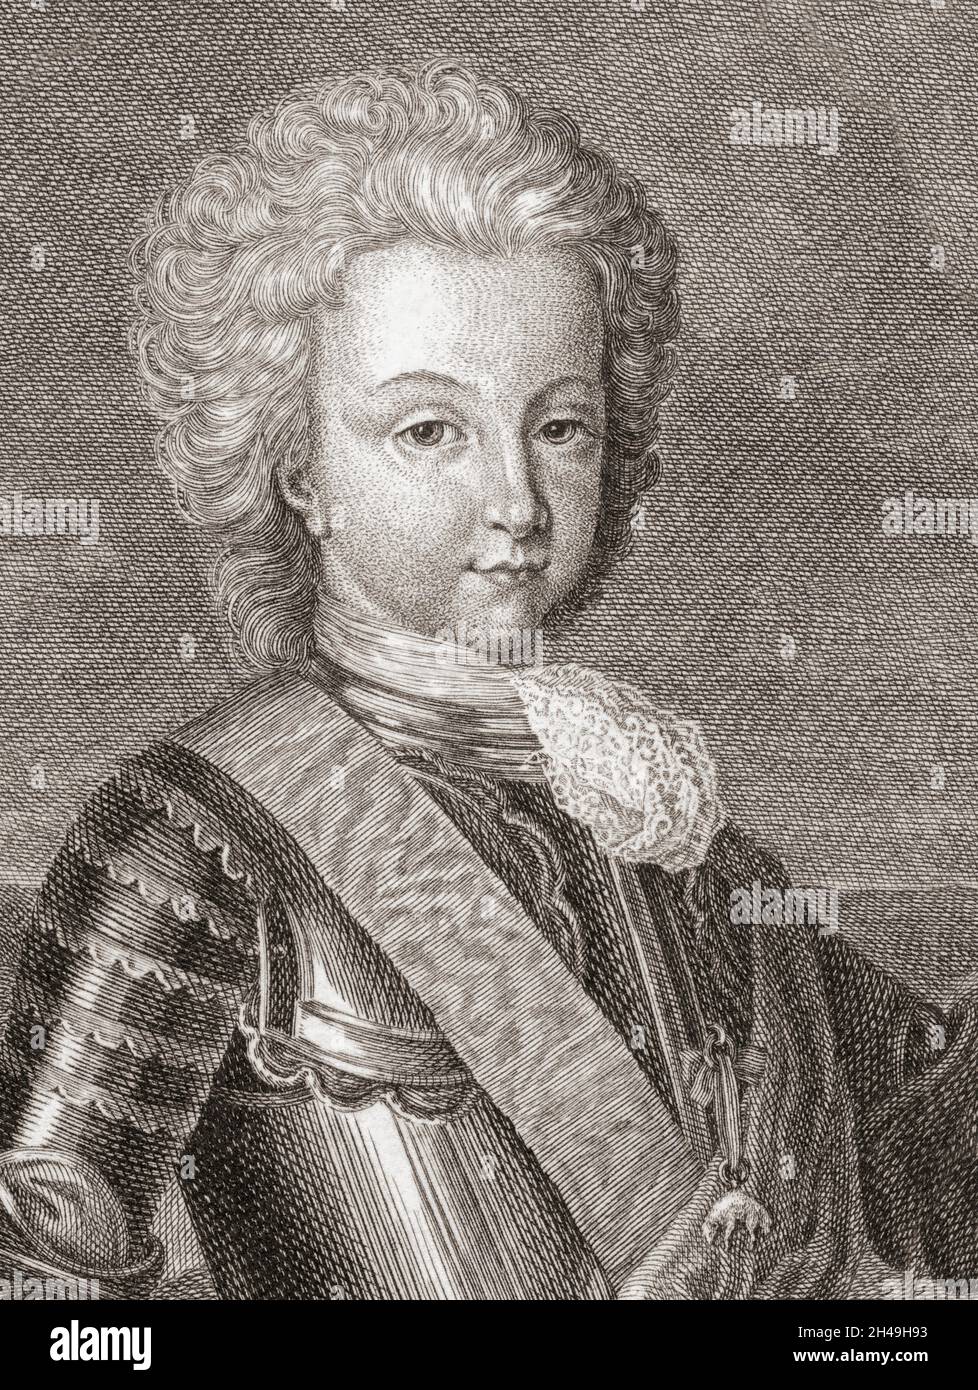 King Luis I of Spain when the Prince of Asturias.  Luis Felipe, 1707-1724.  Known as el Bien Amado, the Well Loved, or el Liberal, the Liberal, he became the shortest reigning king in Spanish history, dying of smallpox just seven months into his reign.  From an 18th century engraving by Bernard Picart after a work by Rene Vialy. Stock Photo